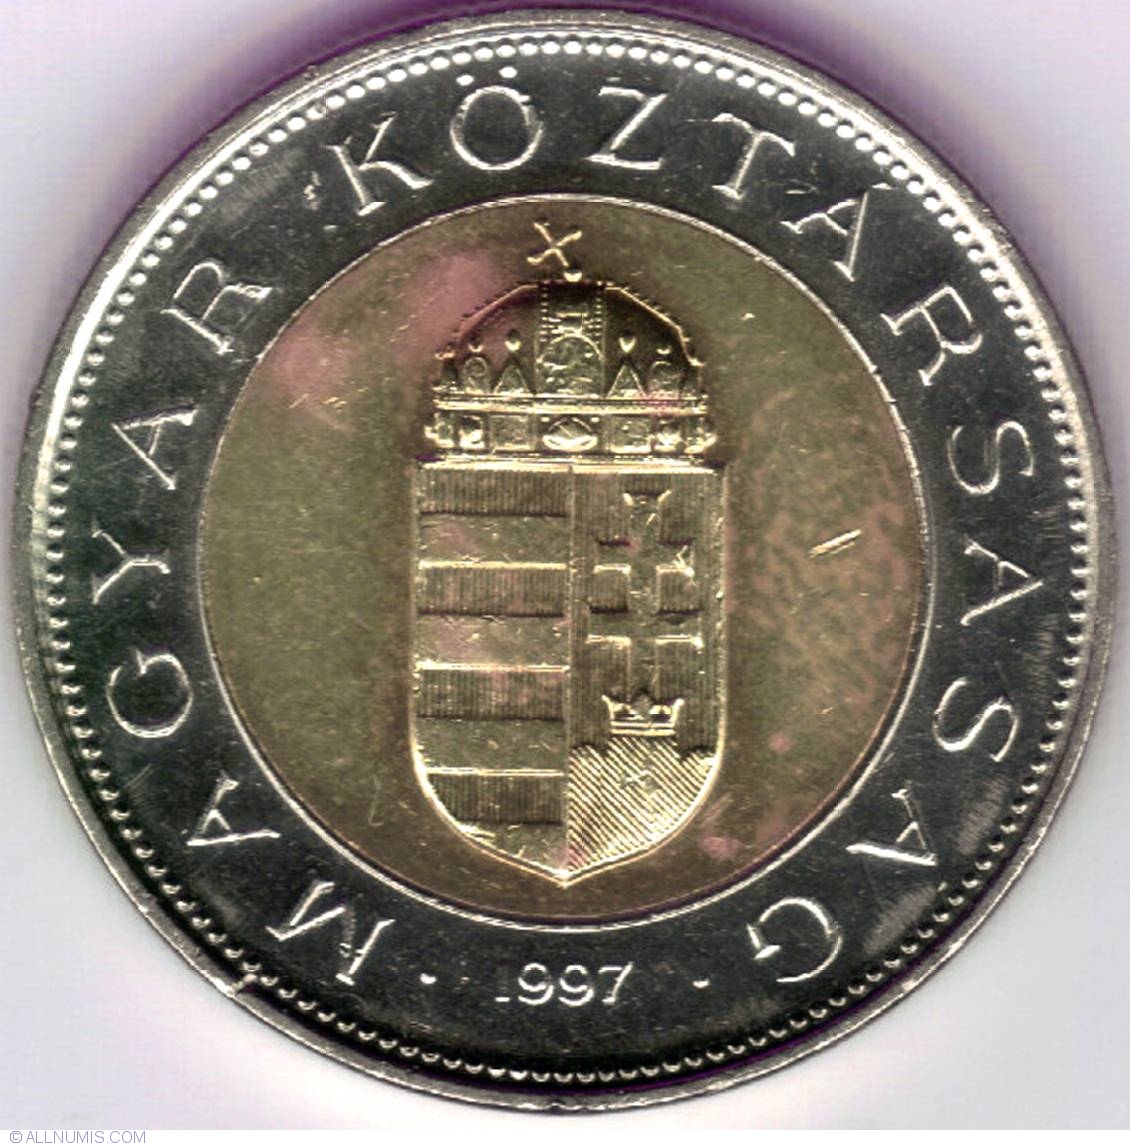 100 forint coin